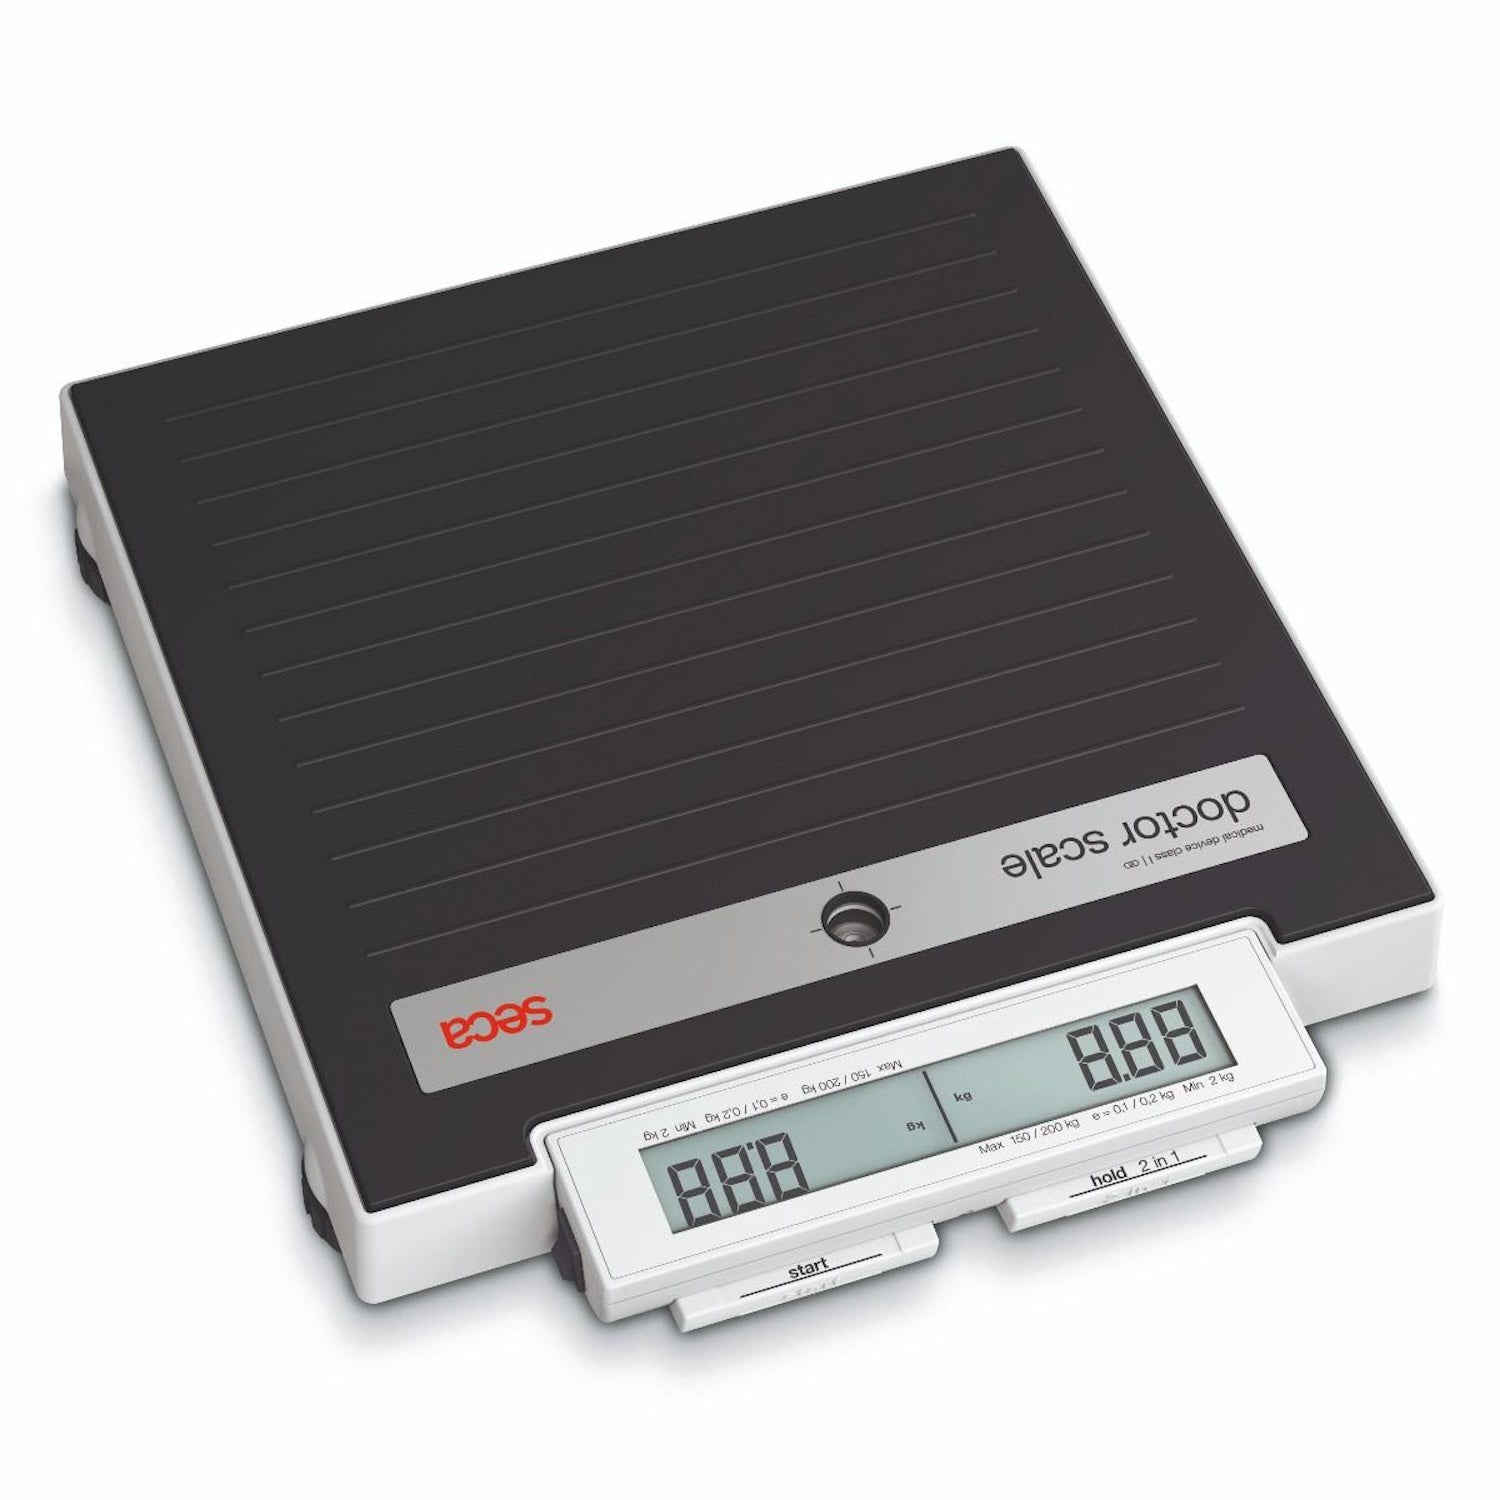 seca 878dr Class III Doctor Electronic Flat Scales (1)